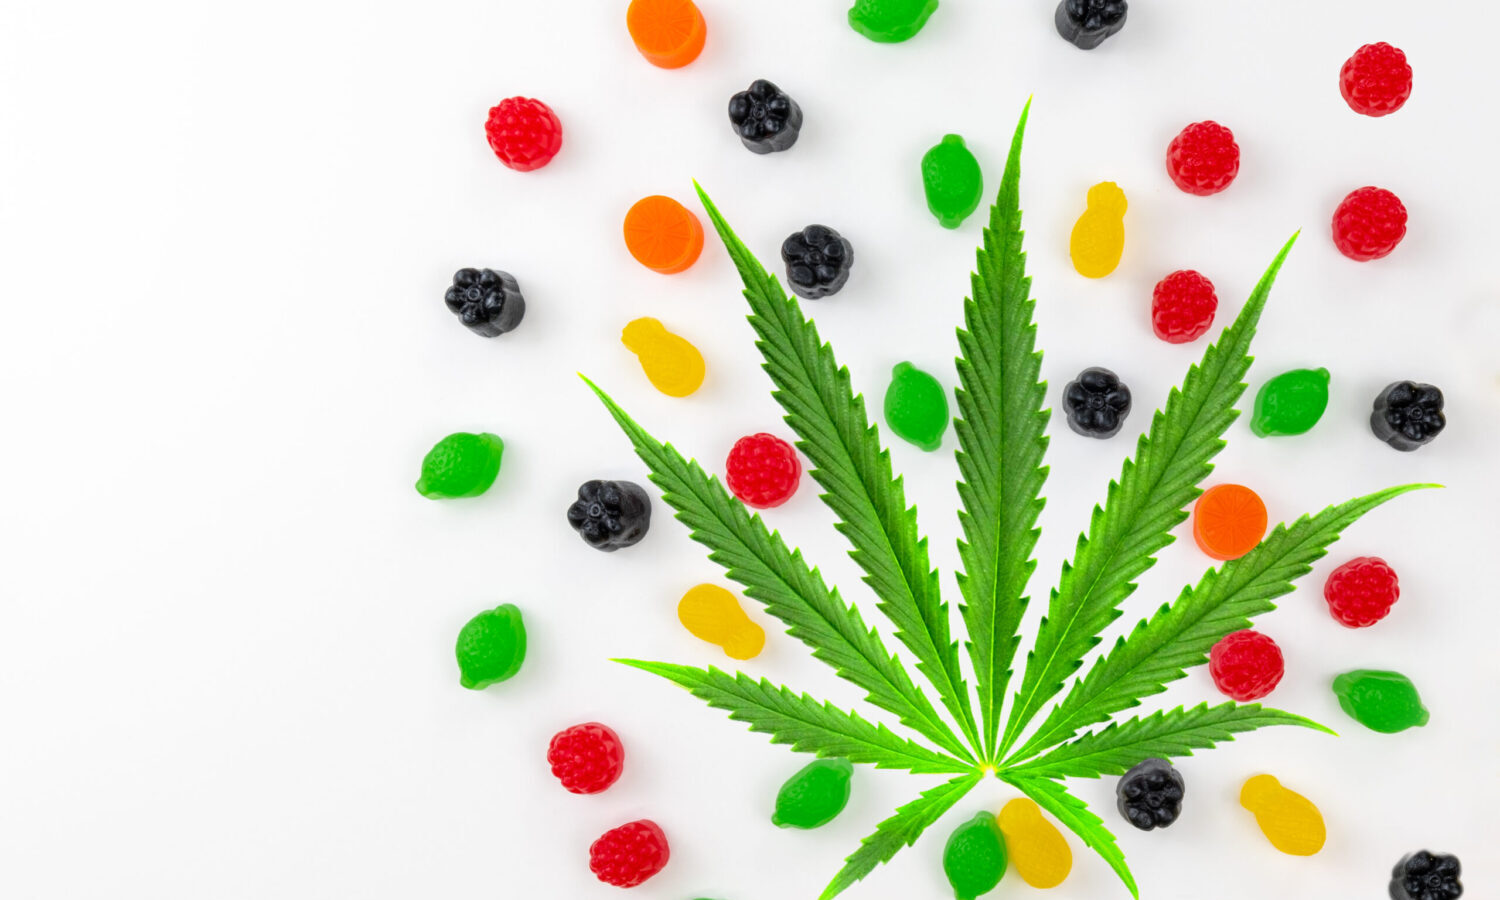 New law would allow edibles to be treated as medical marijuana in Pennsylvania dispensaries